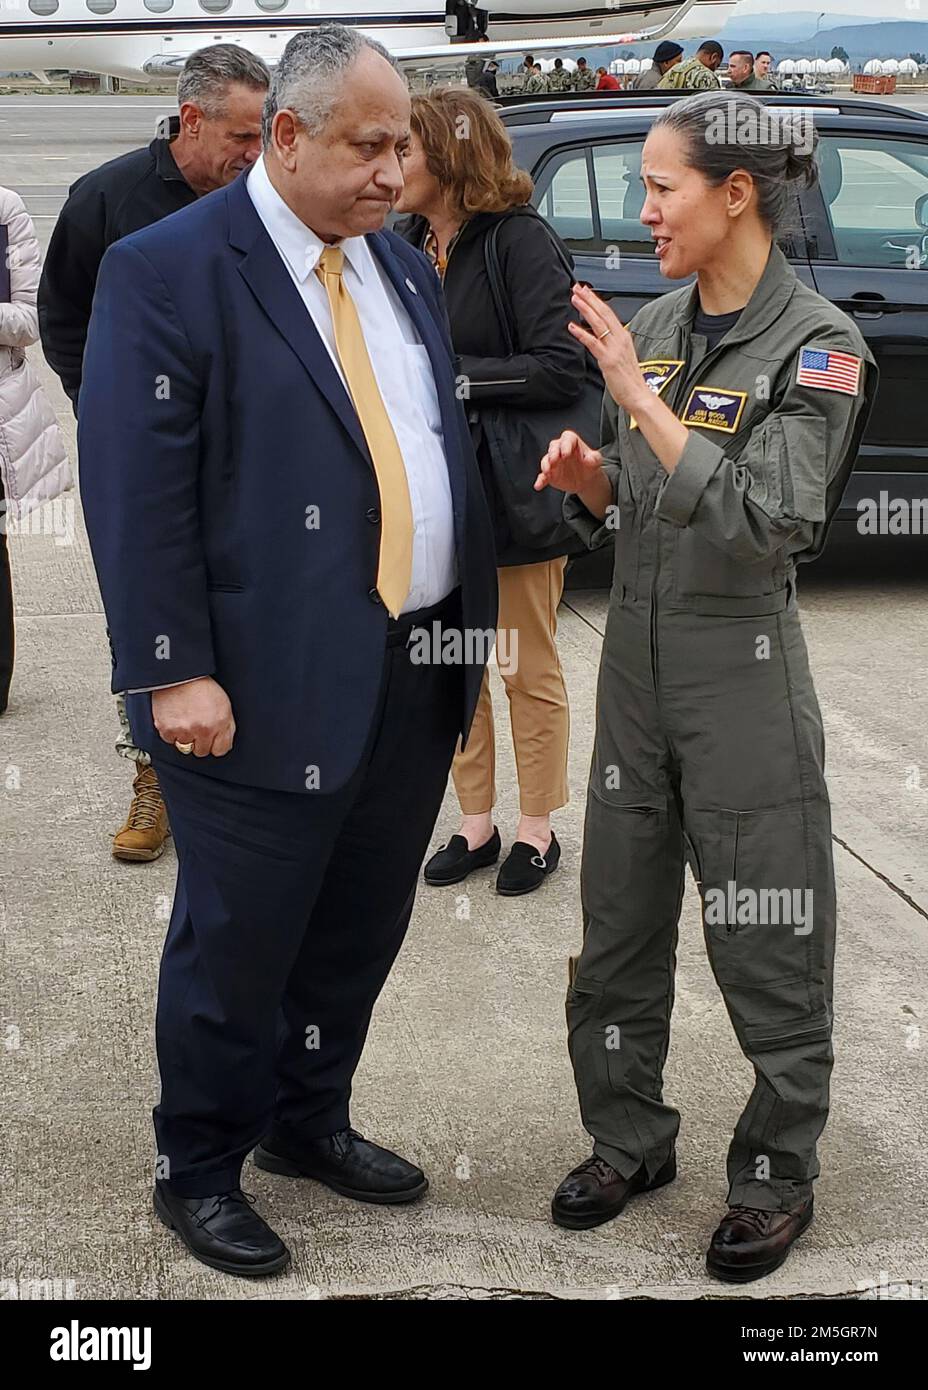 220317-N-OX321-2065 NAVAL AIR STATION SIGONELLA, Italy (March 17, 2022) – Secretary of the Navy Carlos Del Toro, left, speaks with Command Master Chief Anna Wood, Naval Air Station Sigonella command master chief, upon arrival to NAS Sigonella on March 17, 2022. NAS Sigonella’s strategic location enables U.S., allied, and partner nation forces to deploy and respond as required, ensuring security and stability in Europe, Africa, and Central Command. Stock Photo